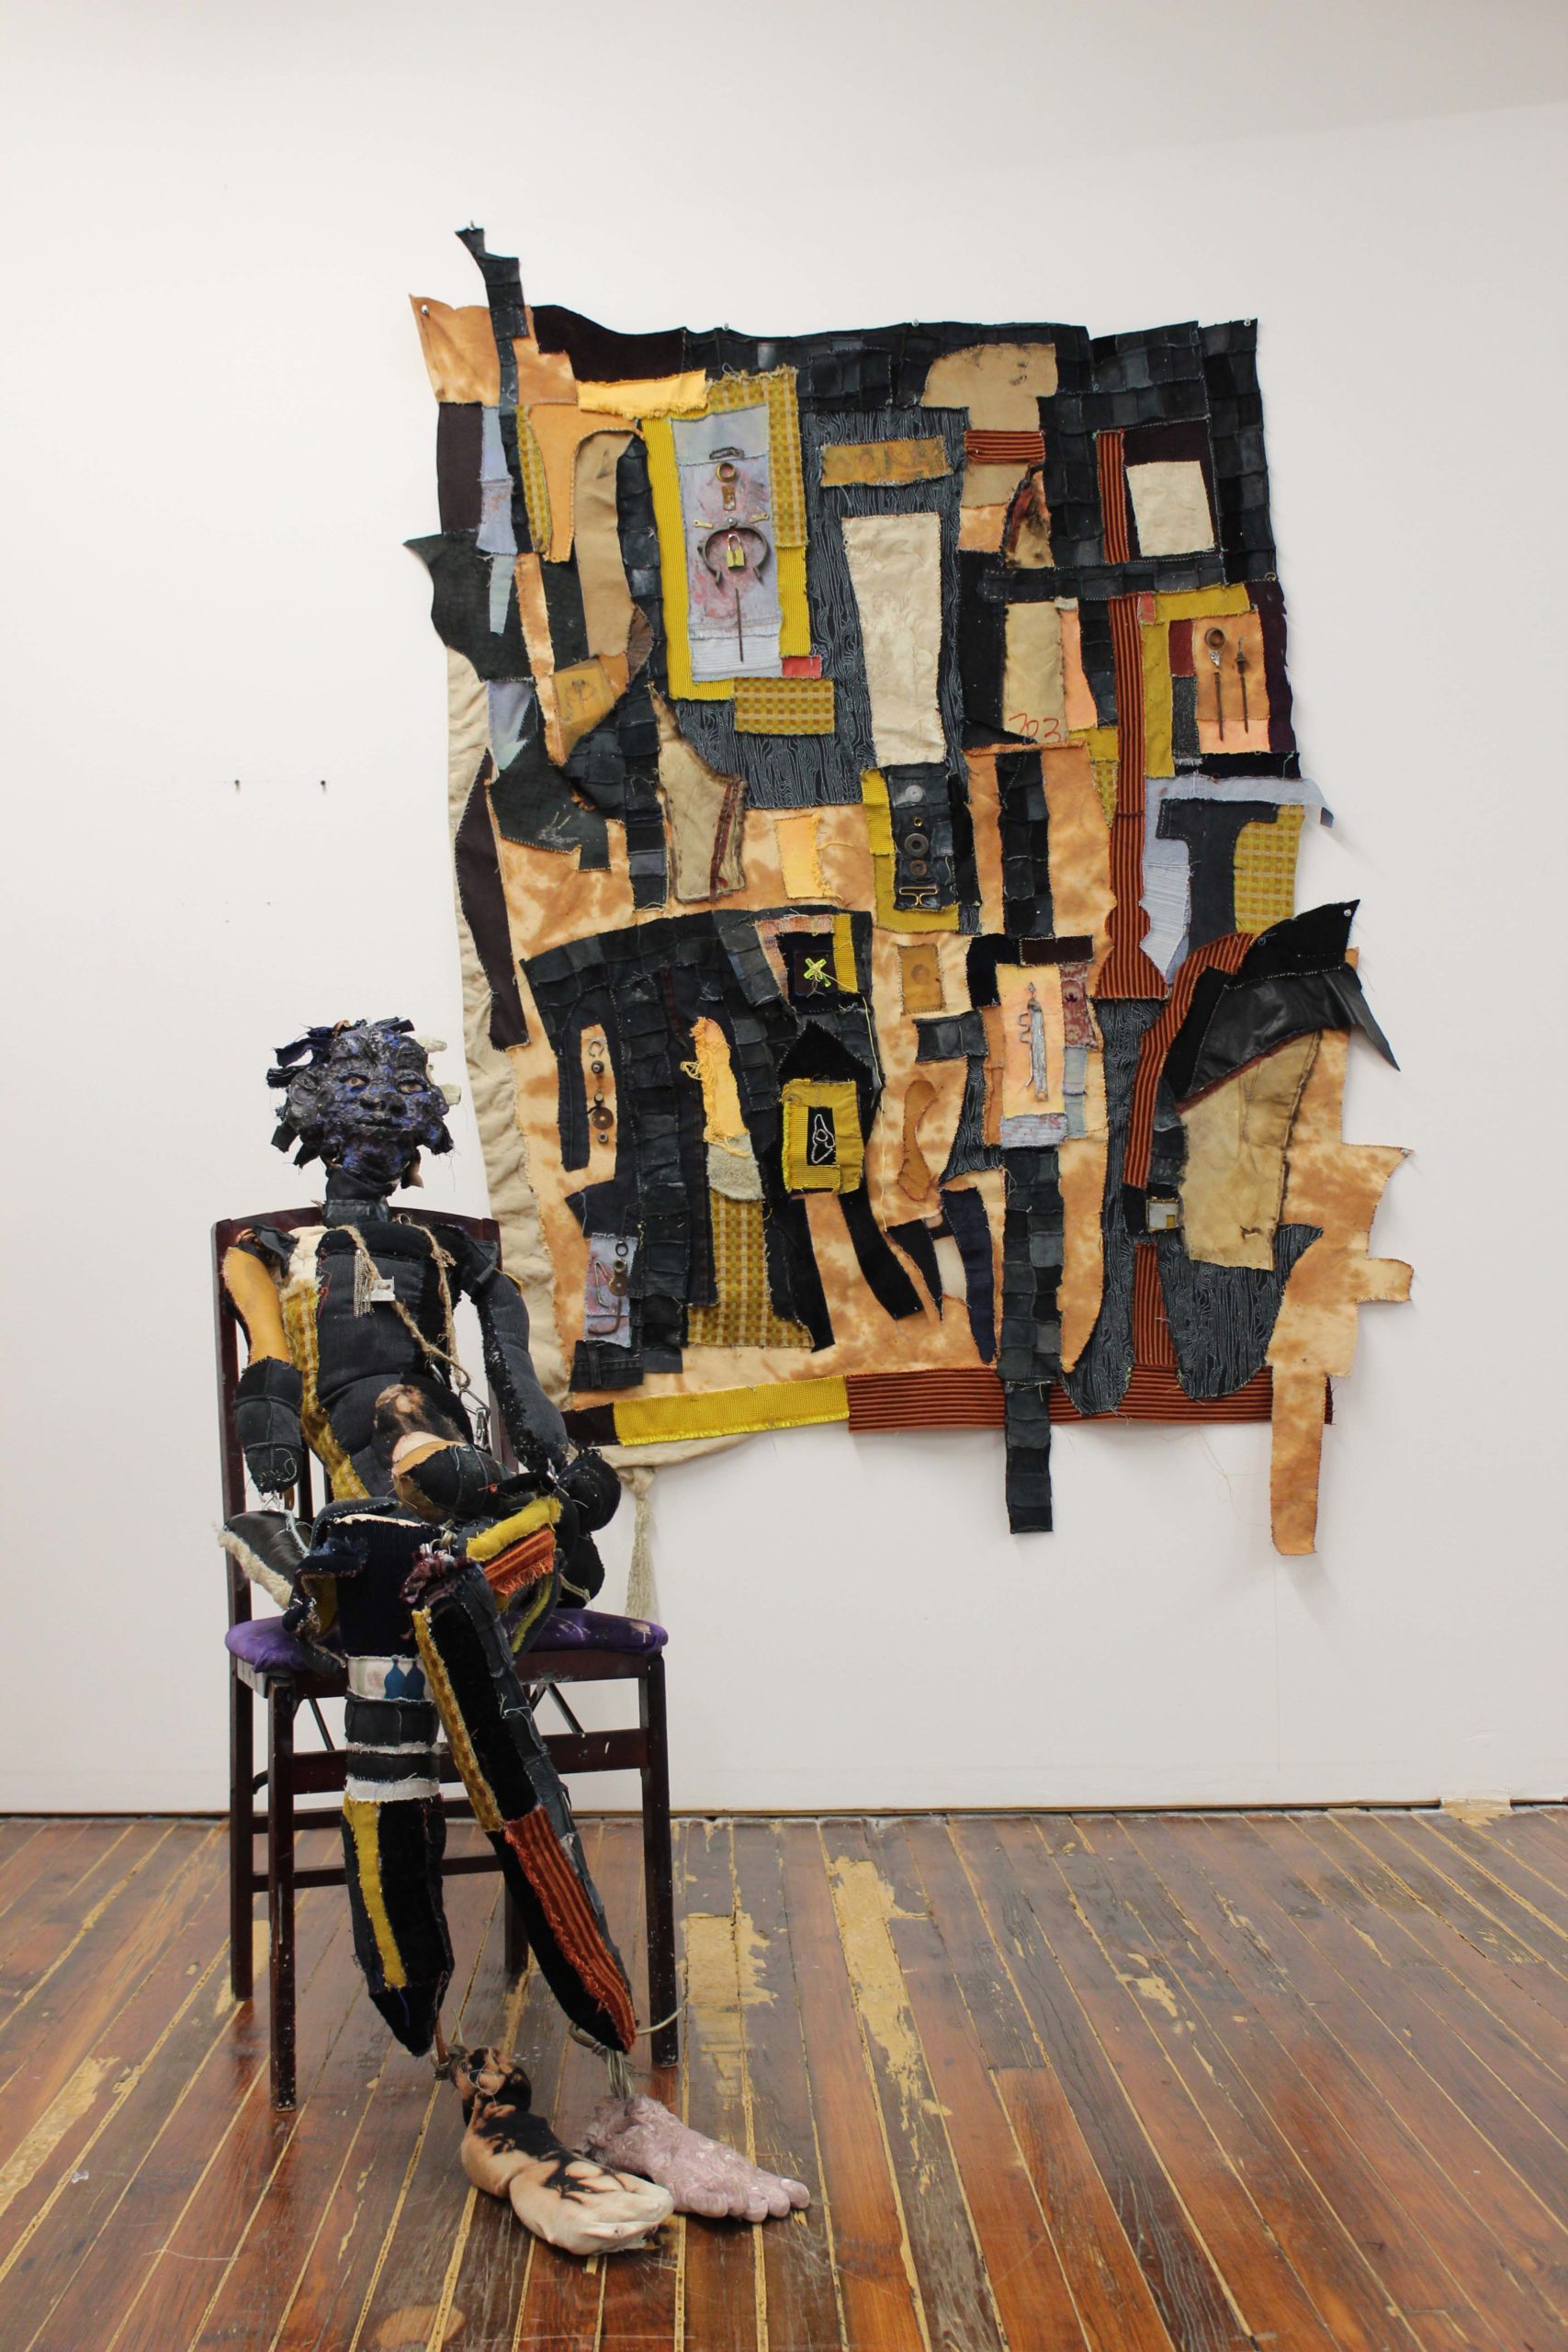 Assemblage of a person sitting in a chair in front of a constructed map.